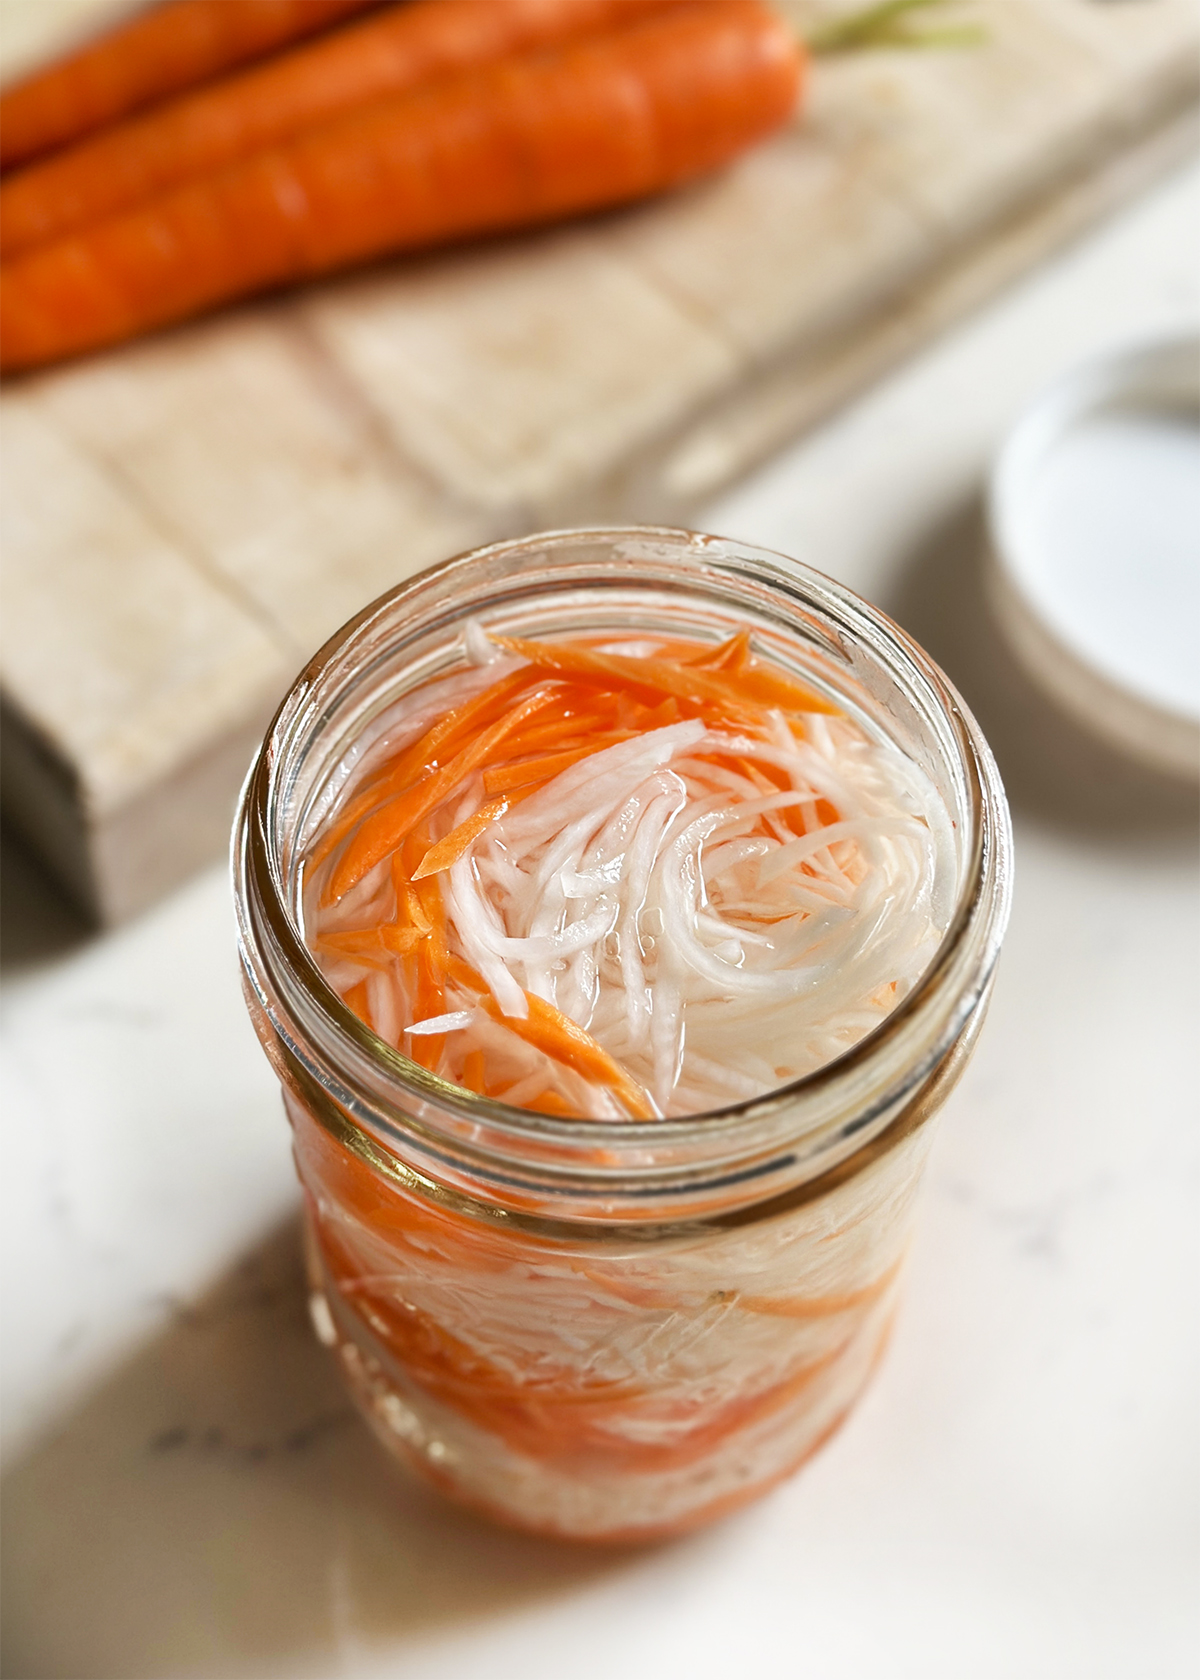 pickled daikon radish and carrots in glass jar